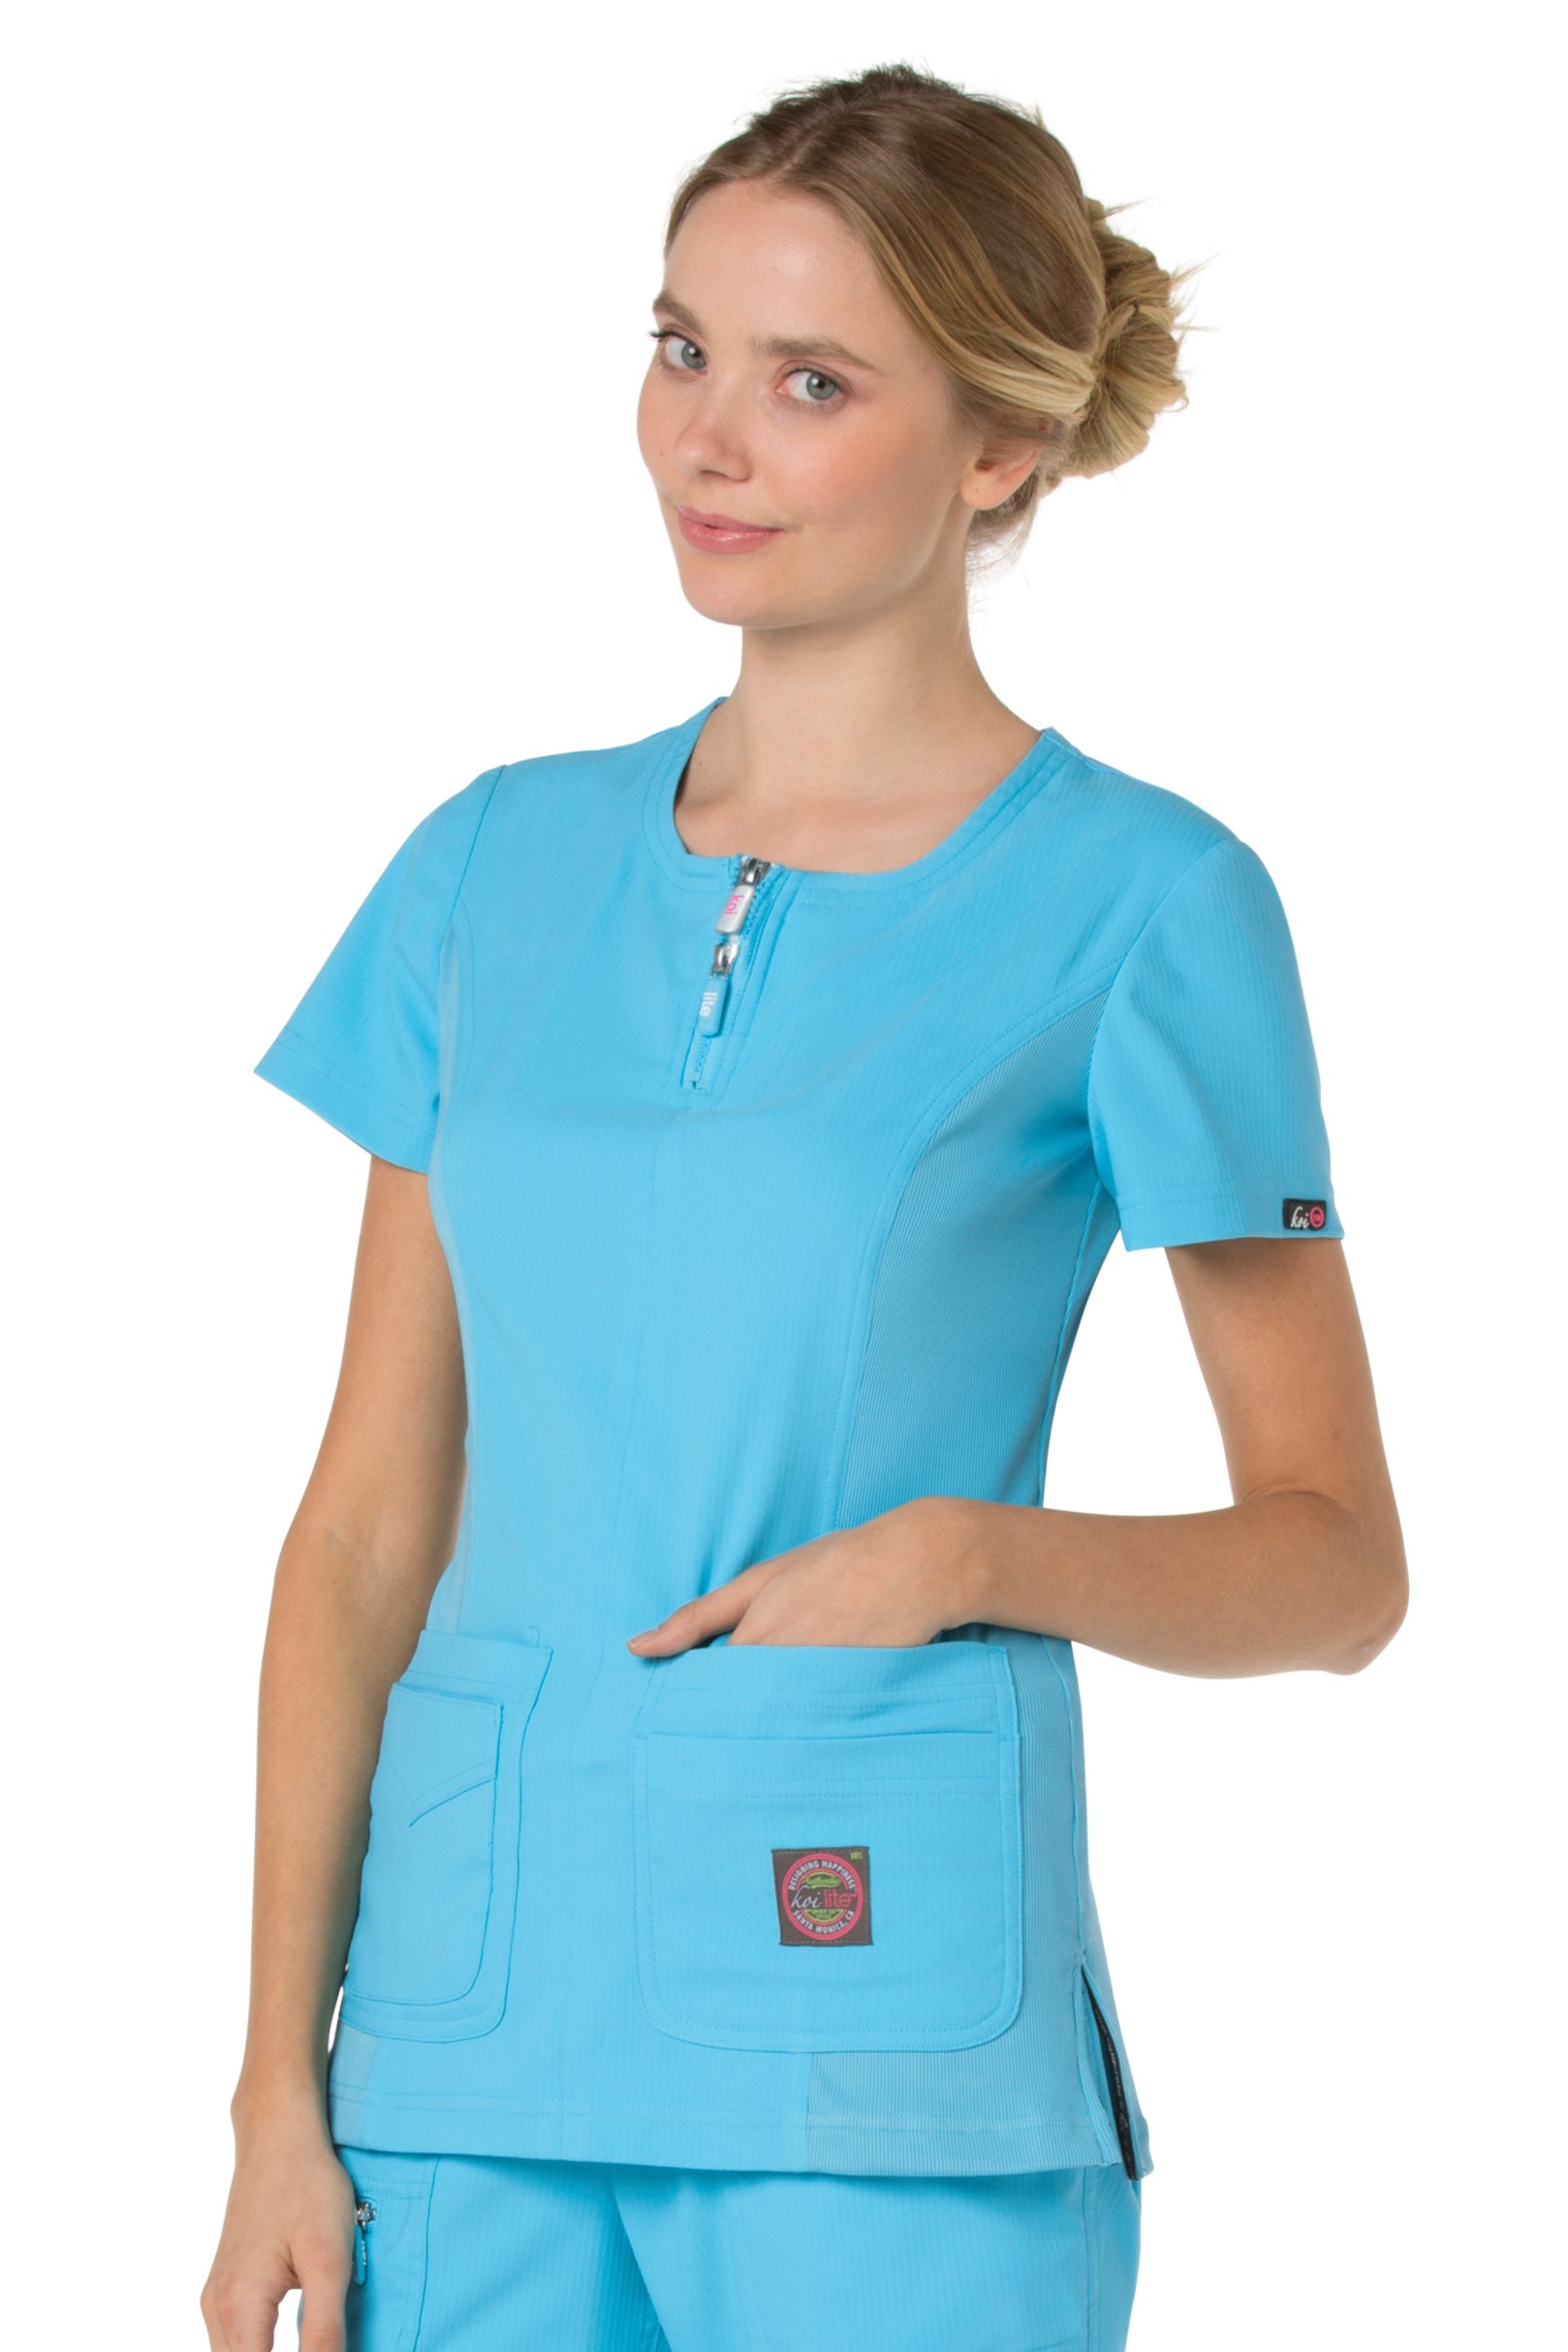 Dental Scrubs for Hygienists and Therapists | Happythreads